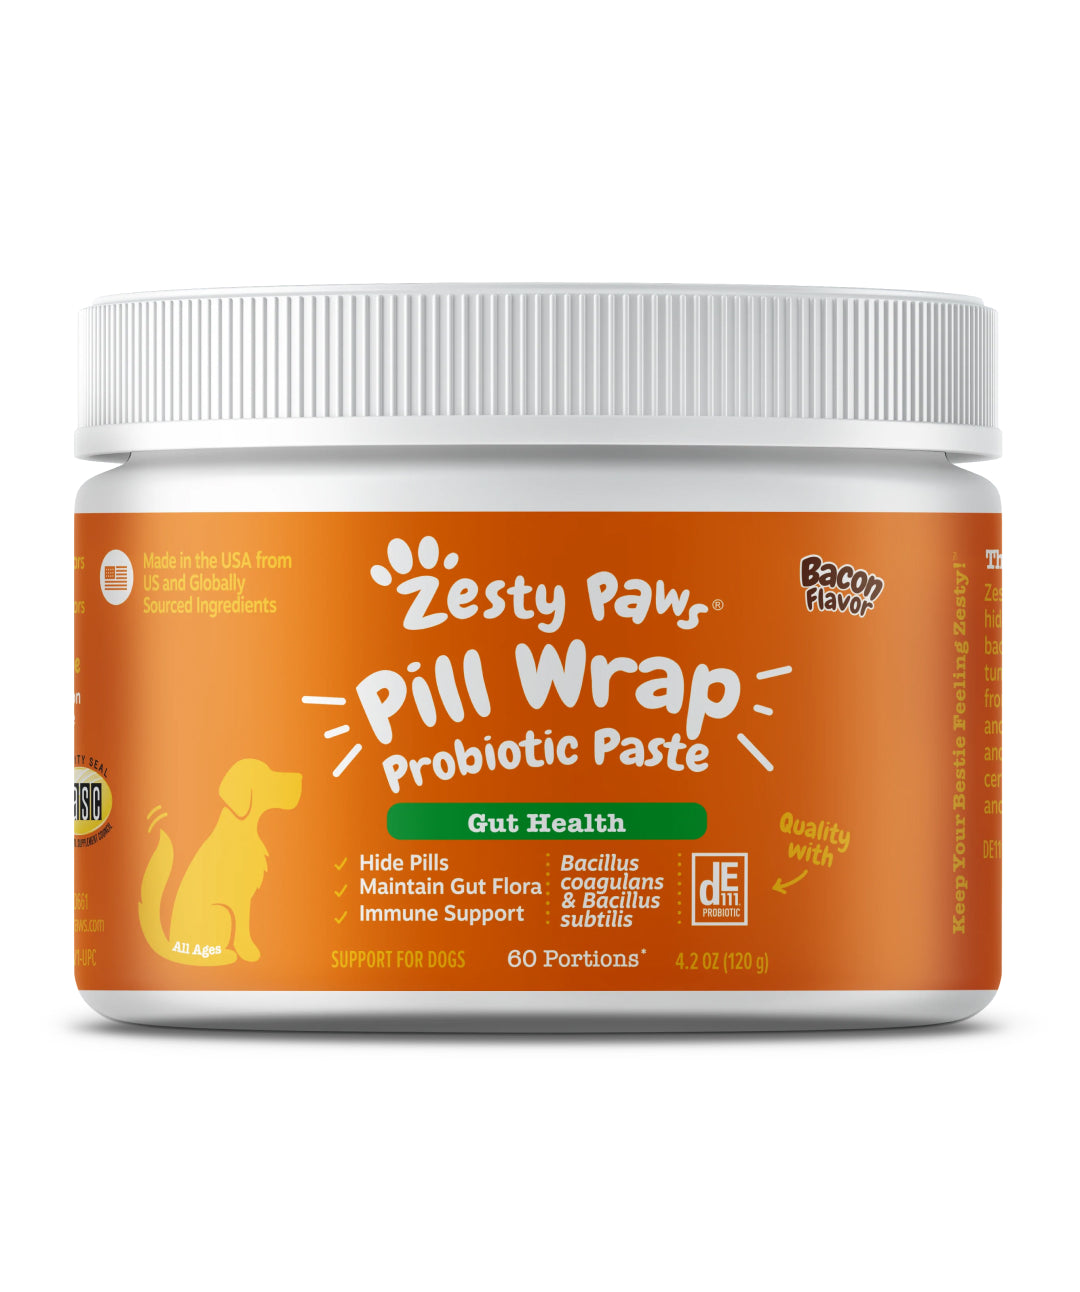 Zesty Paws Pill Wrap Probiotic Paste for Dogs Dog Treats Rover 